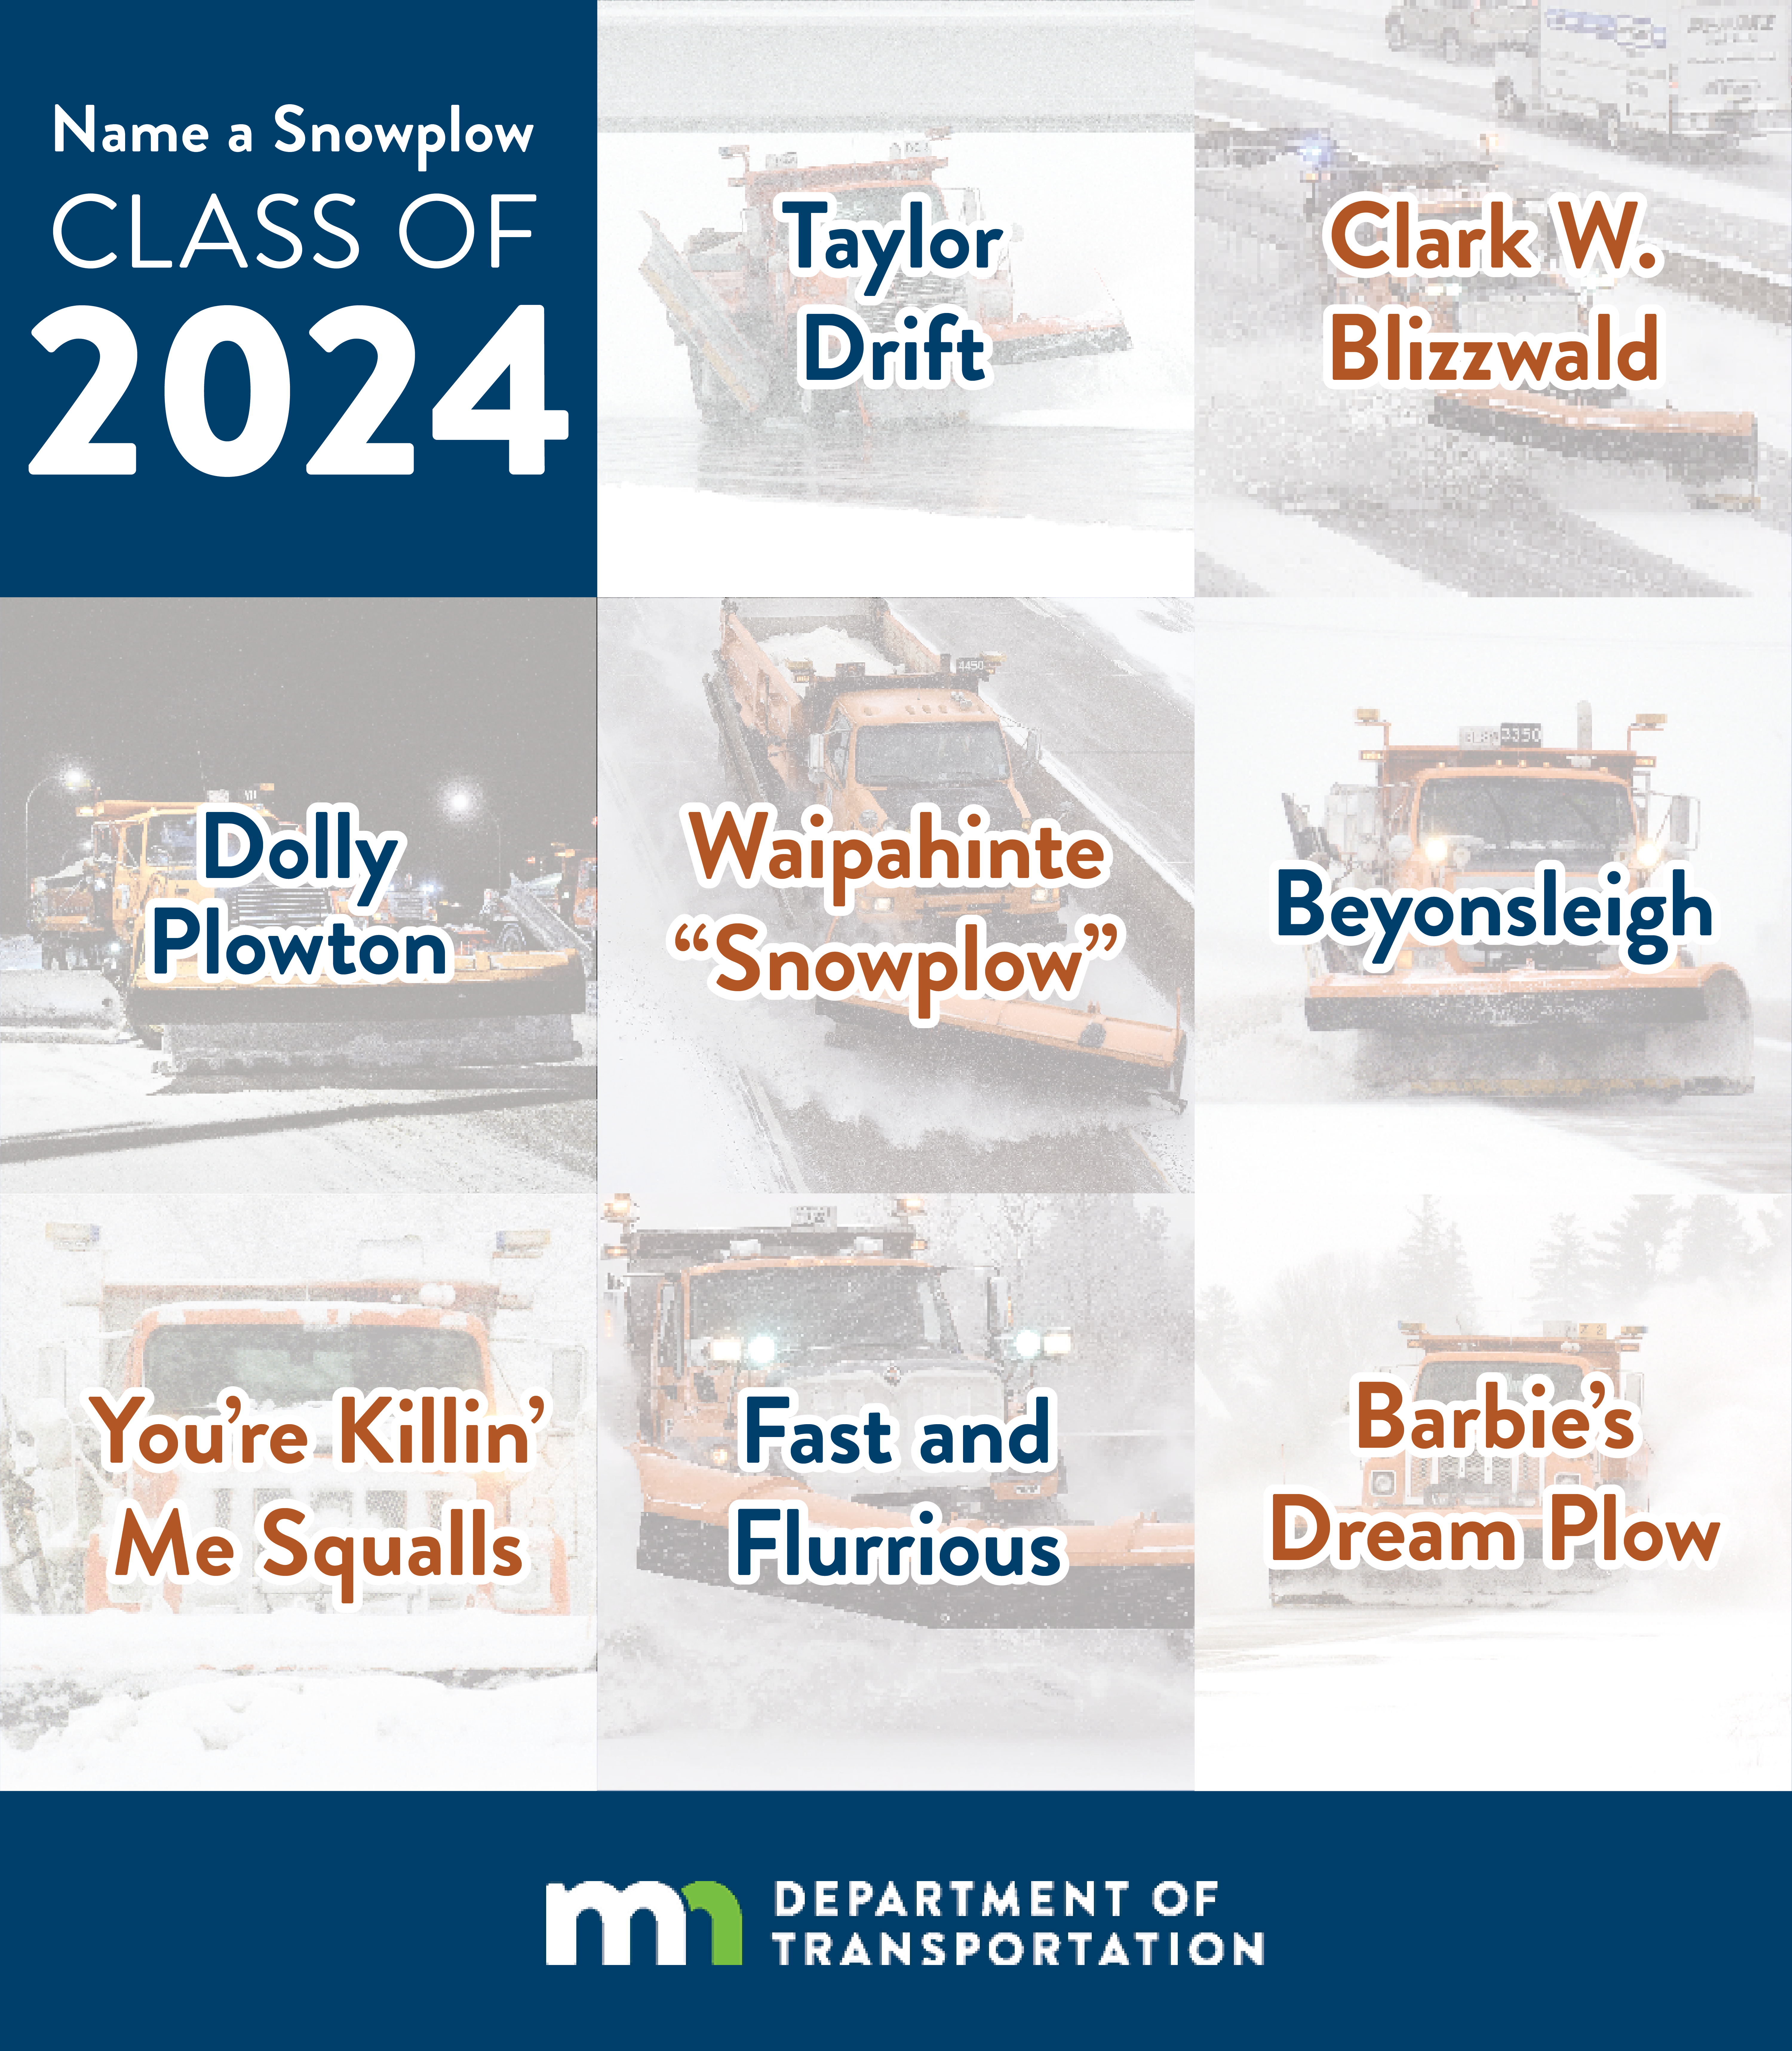 Name a Snowplow Class of 2024: Taylor Drift, Clark W. Blizzwald, Dolly Plowton, Waipahinte ("Snowplow"), Beyonsleigh, You're Killin' Me Squalls, Fast and Flurrious, Barbie's Dream Plow